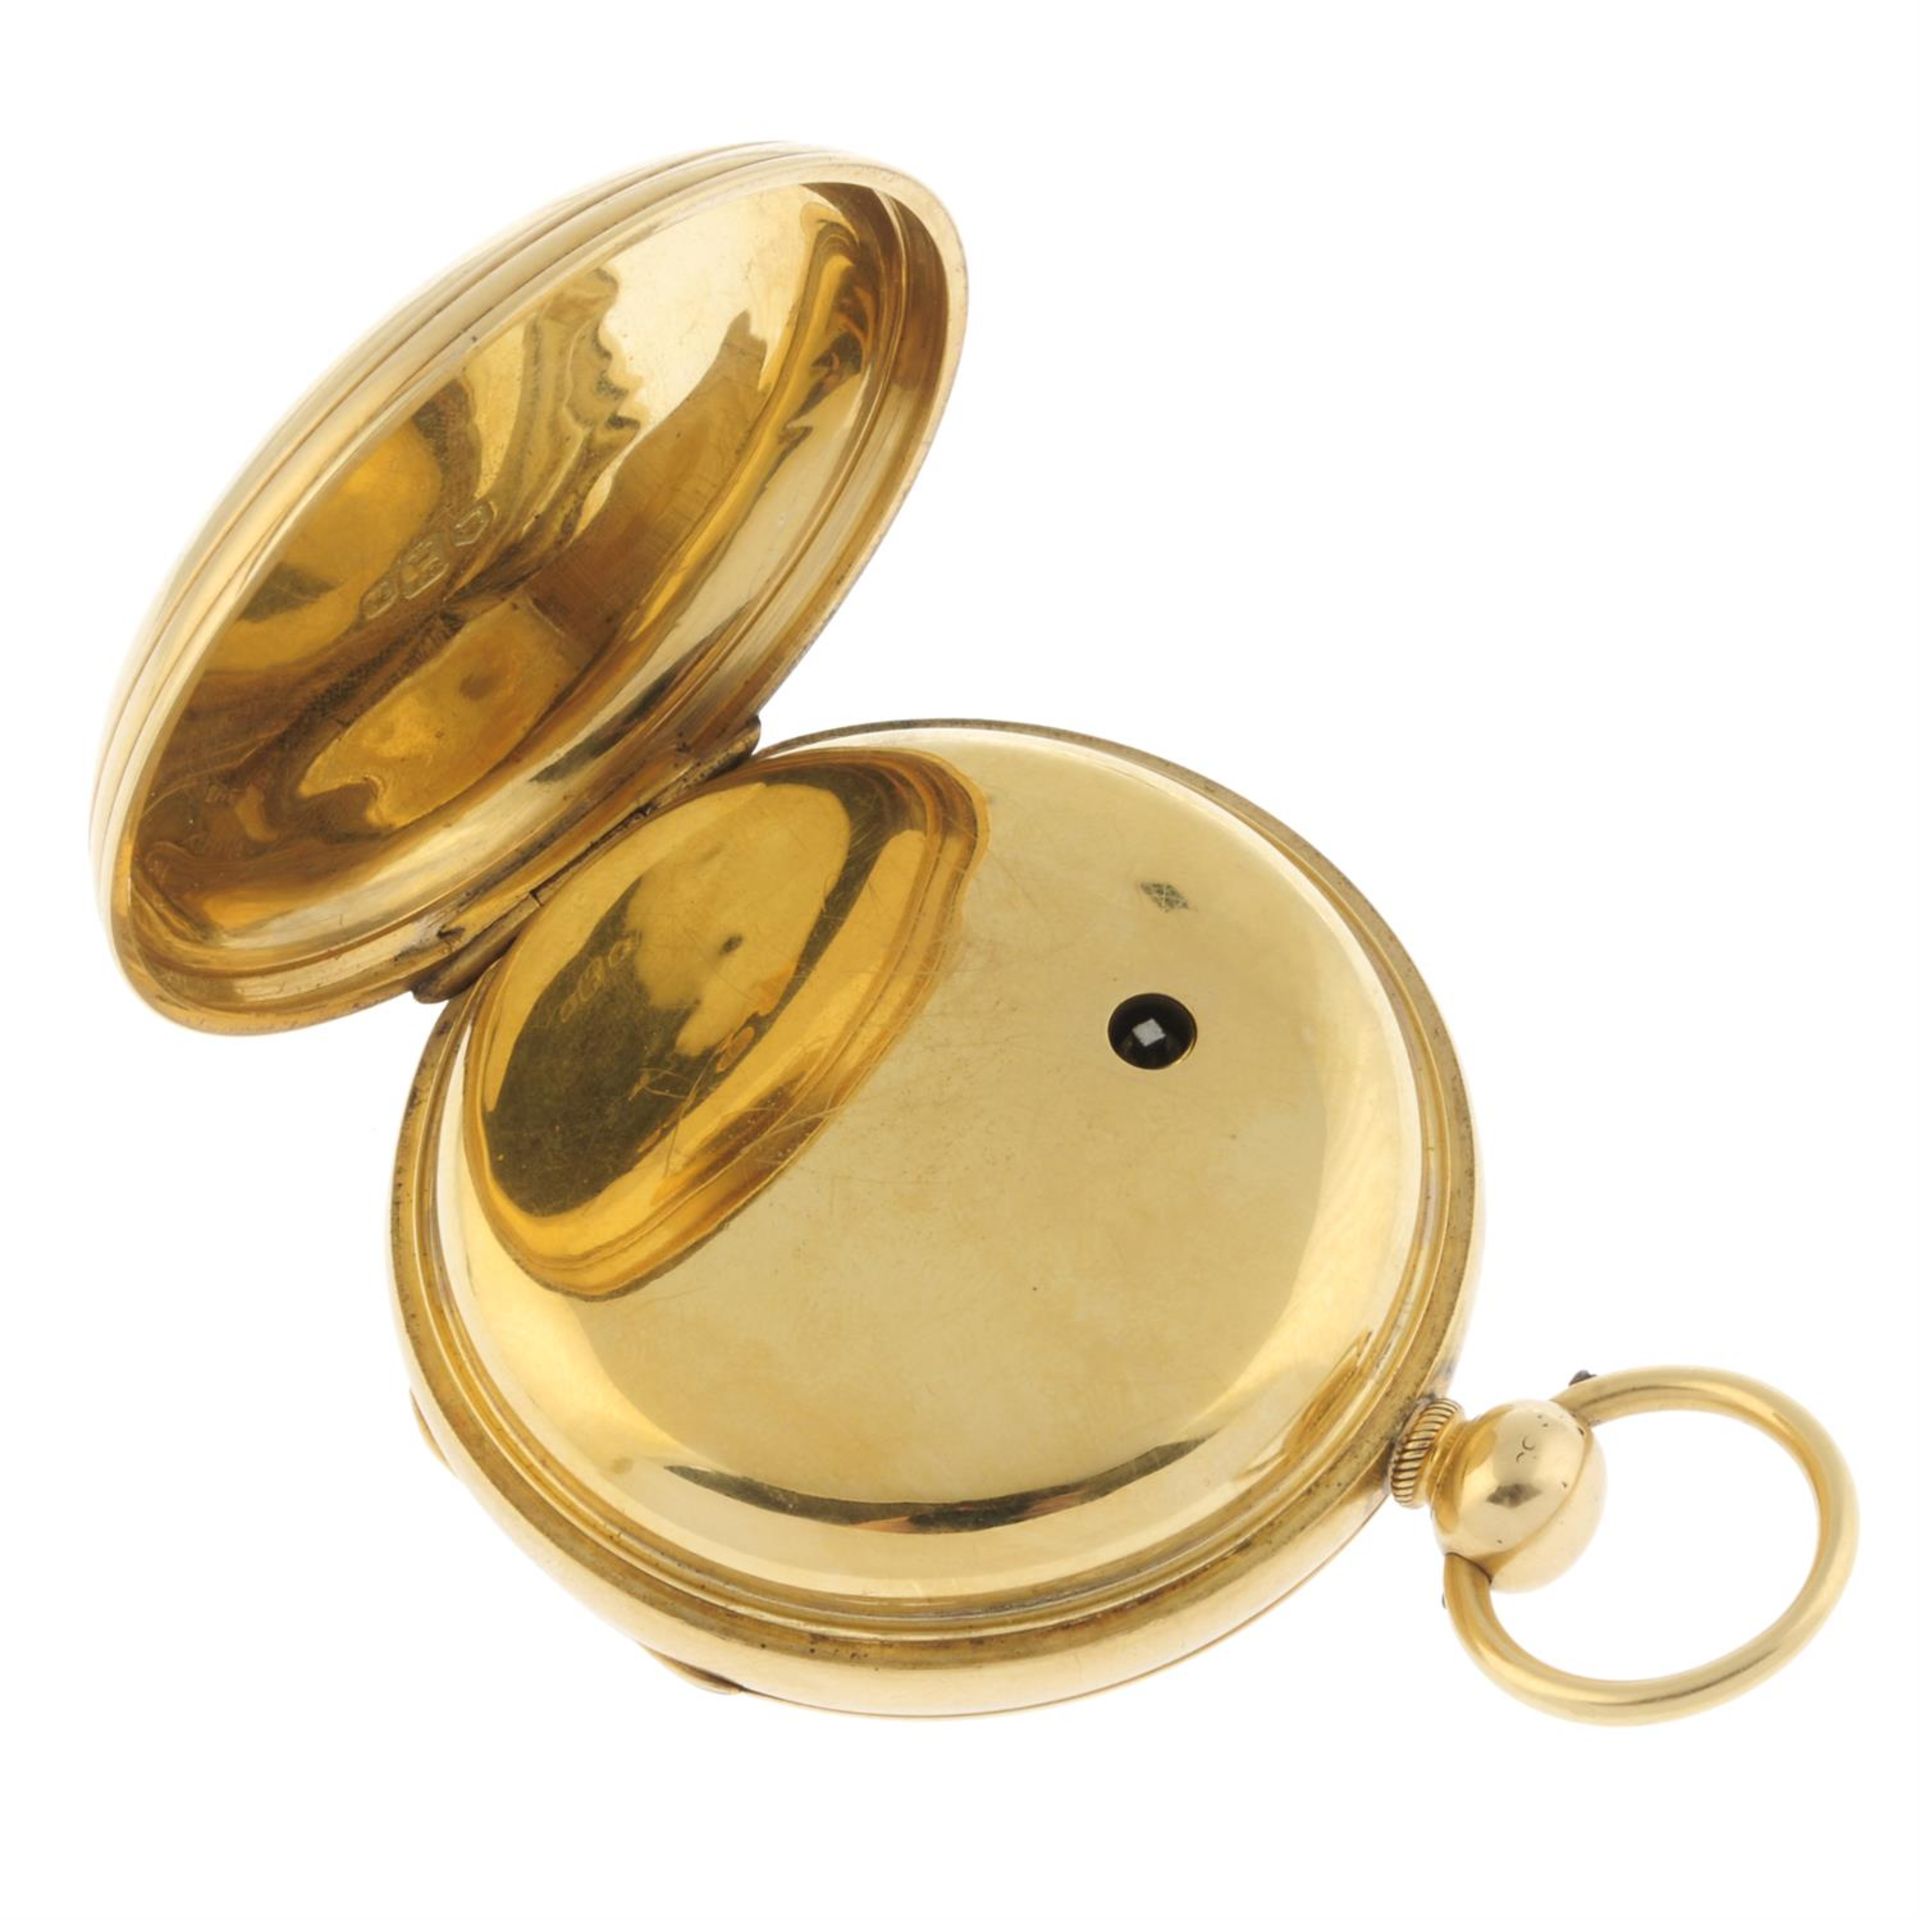 A pocket watch by Eiffe, 53mm. - Image 3 of 4